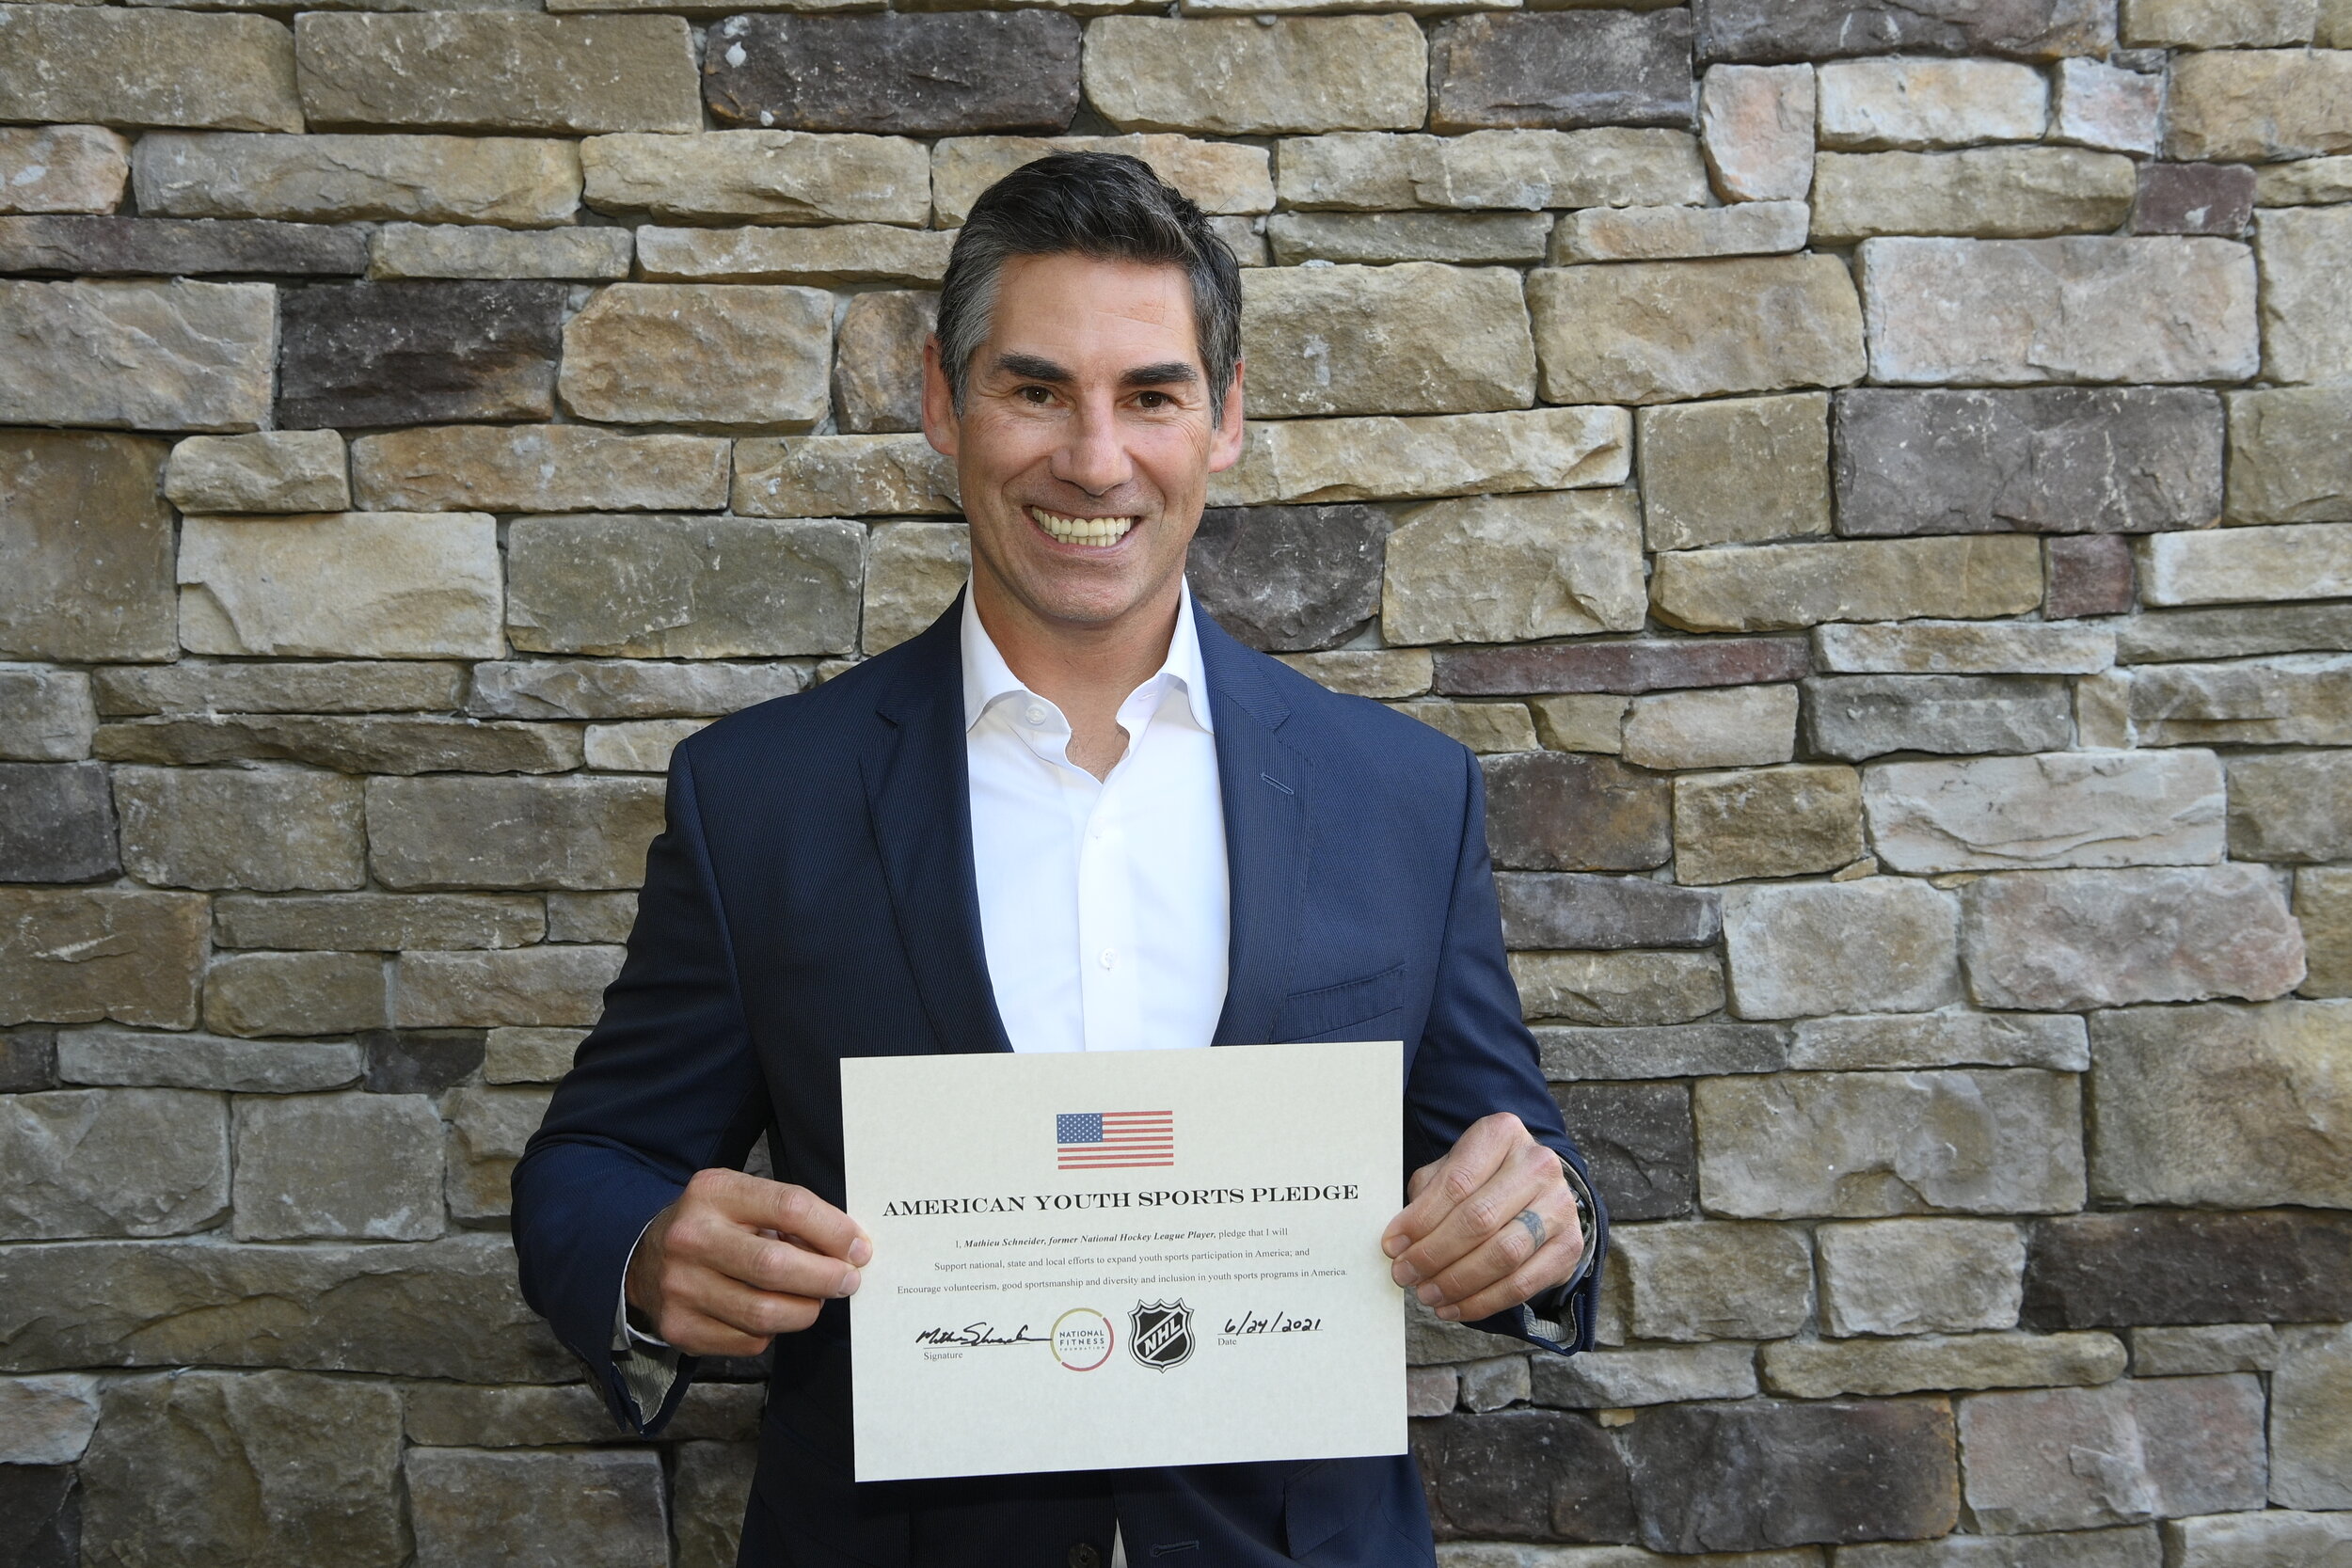  Mathieu Schneider, former NHL Player, takes the American Youth Sports Pledge. 